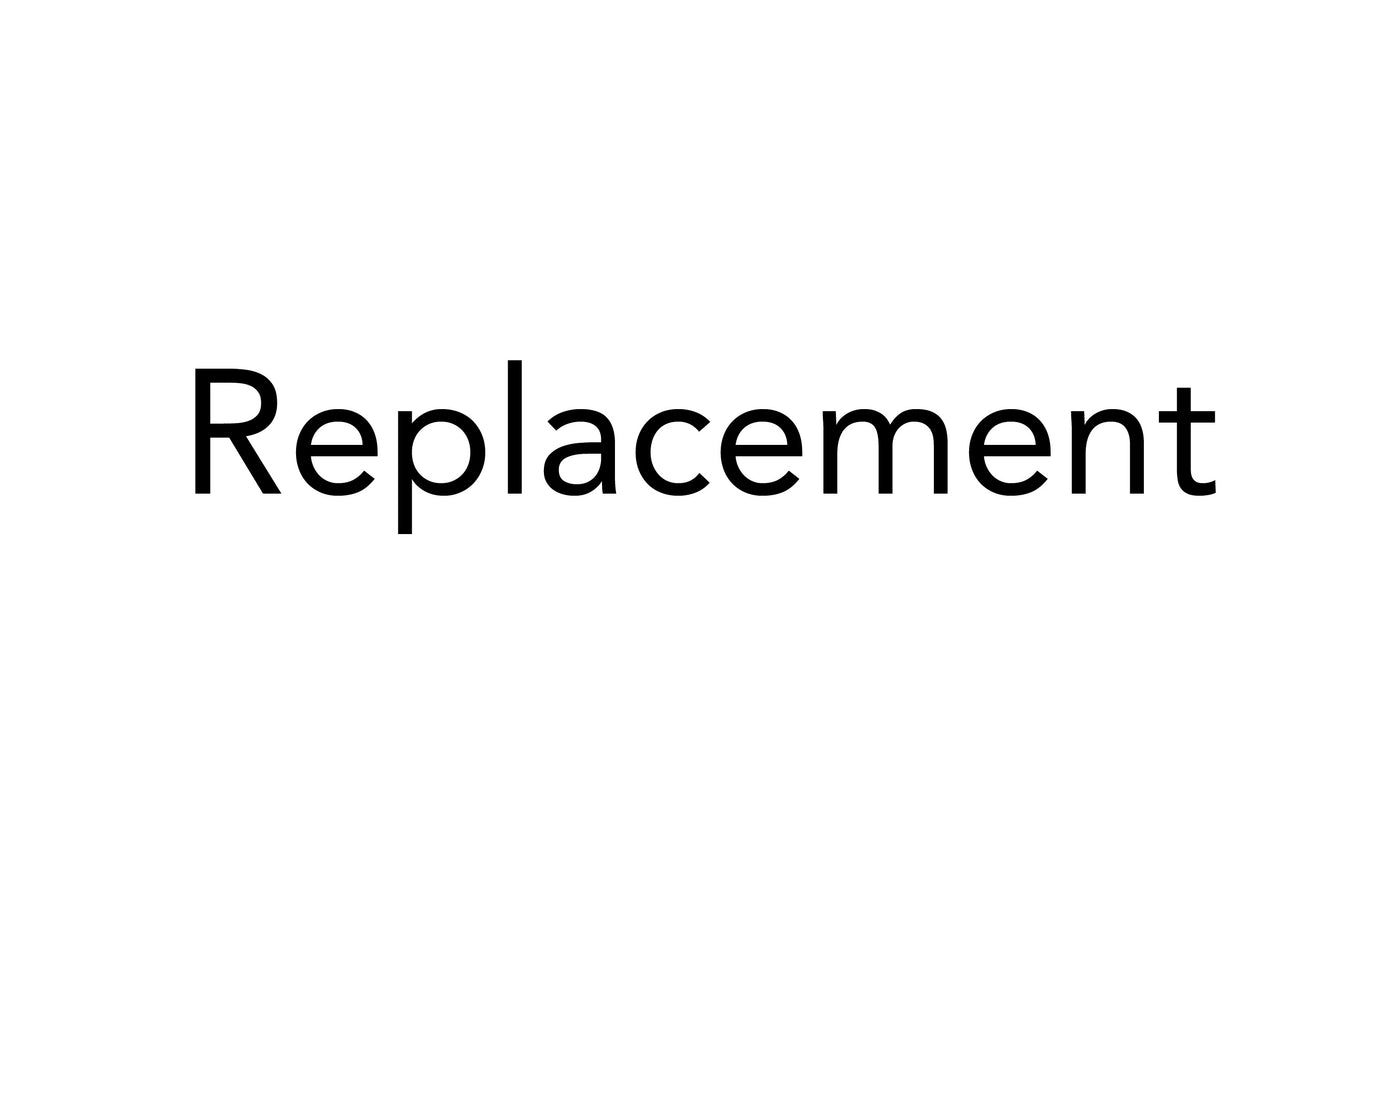 Replacement